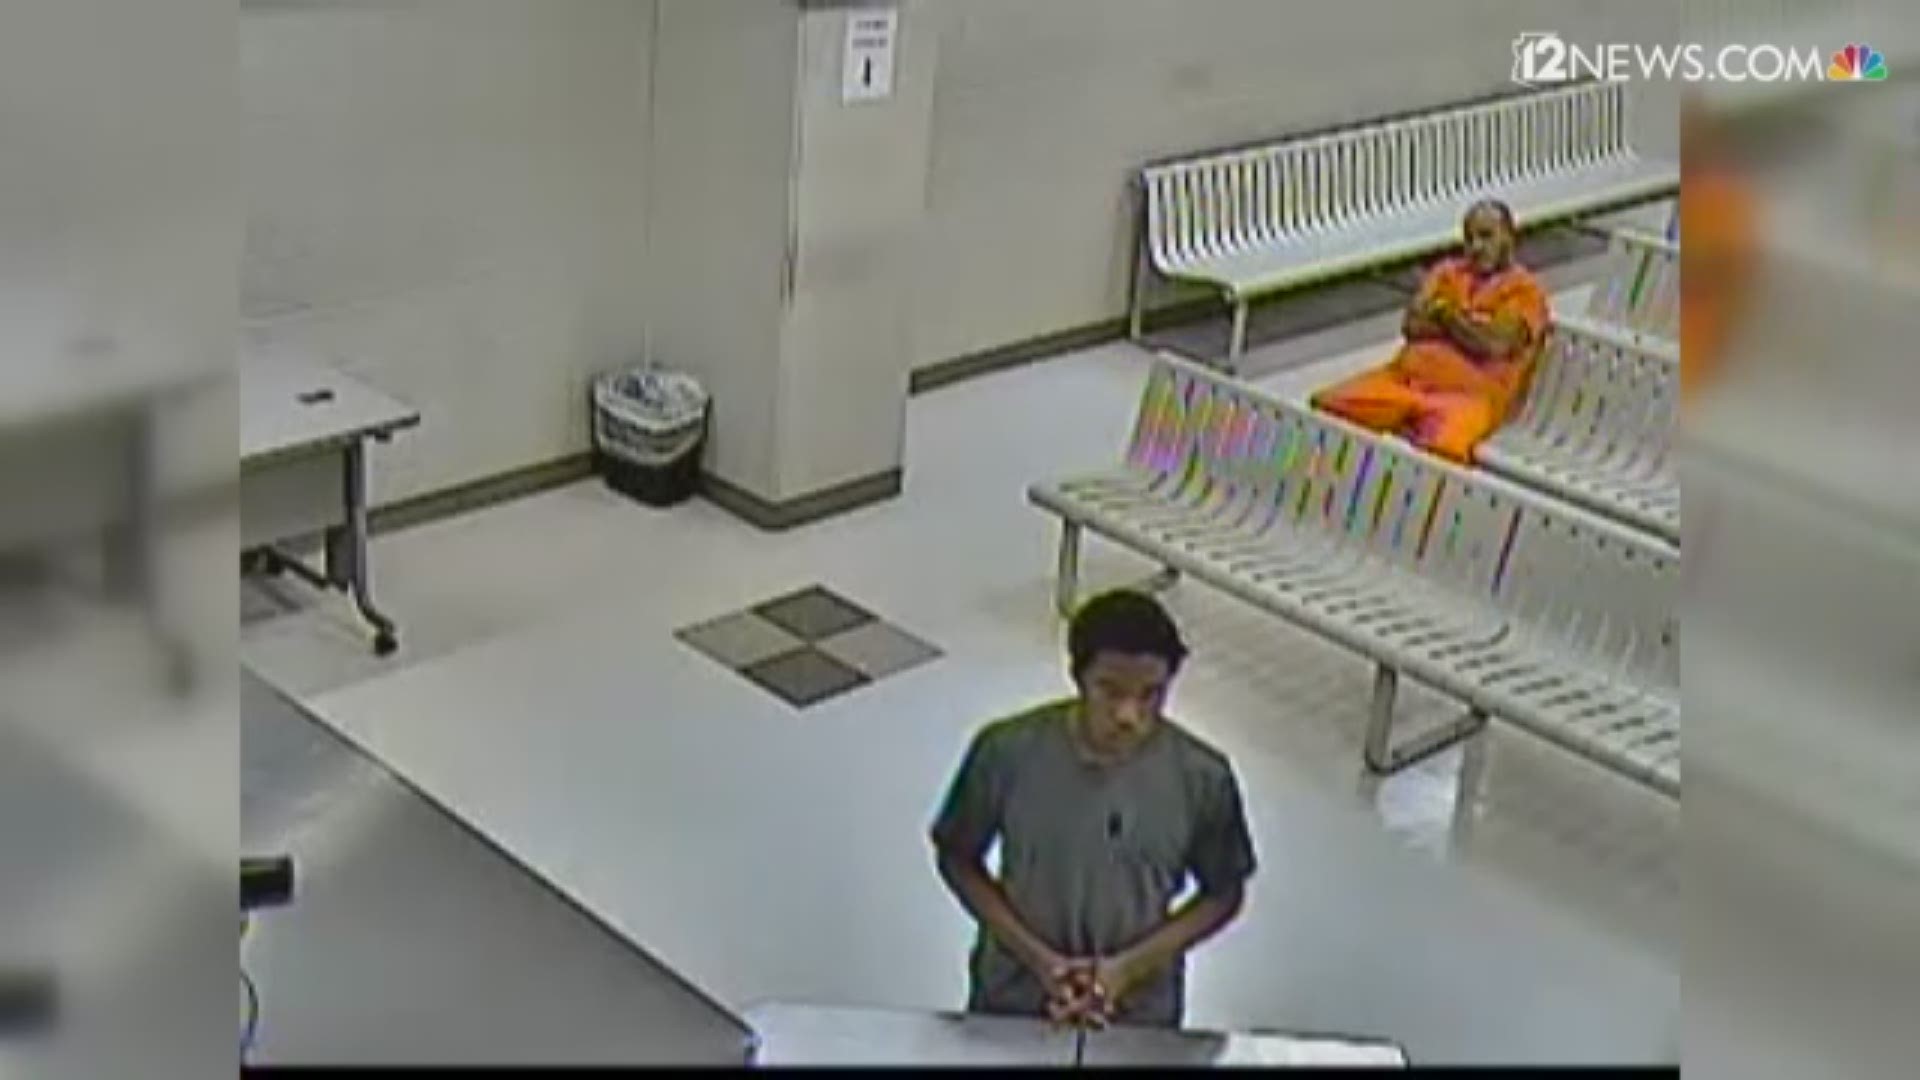 18-year-old Demarco Lewis appeared in court on charges of indecent exposure while working at a McDonald's in Goodyear. Two victims came forward to their manager to say Lewis exposed himself to them on two separate occasions. Lewis was previously convicted for sexual assault in 2017, according to court documents.